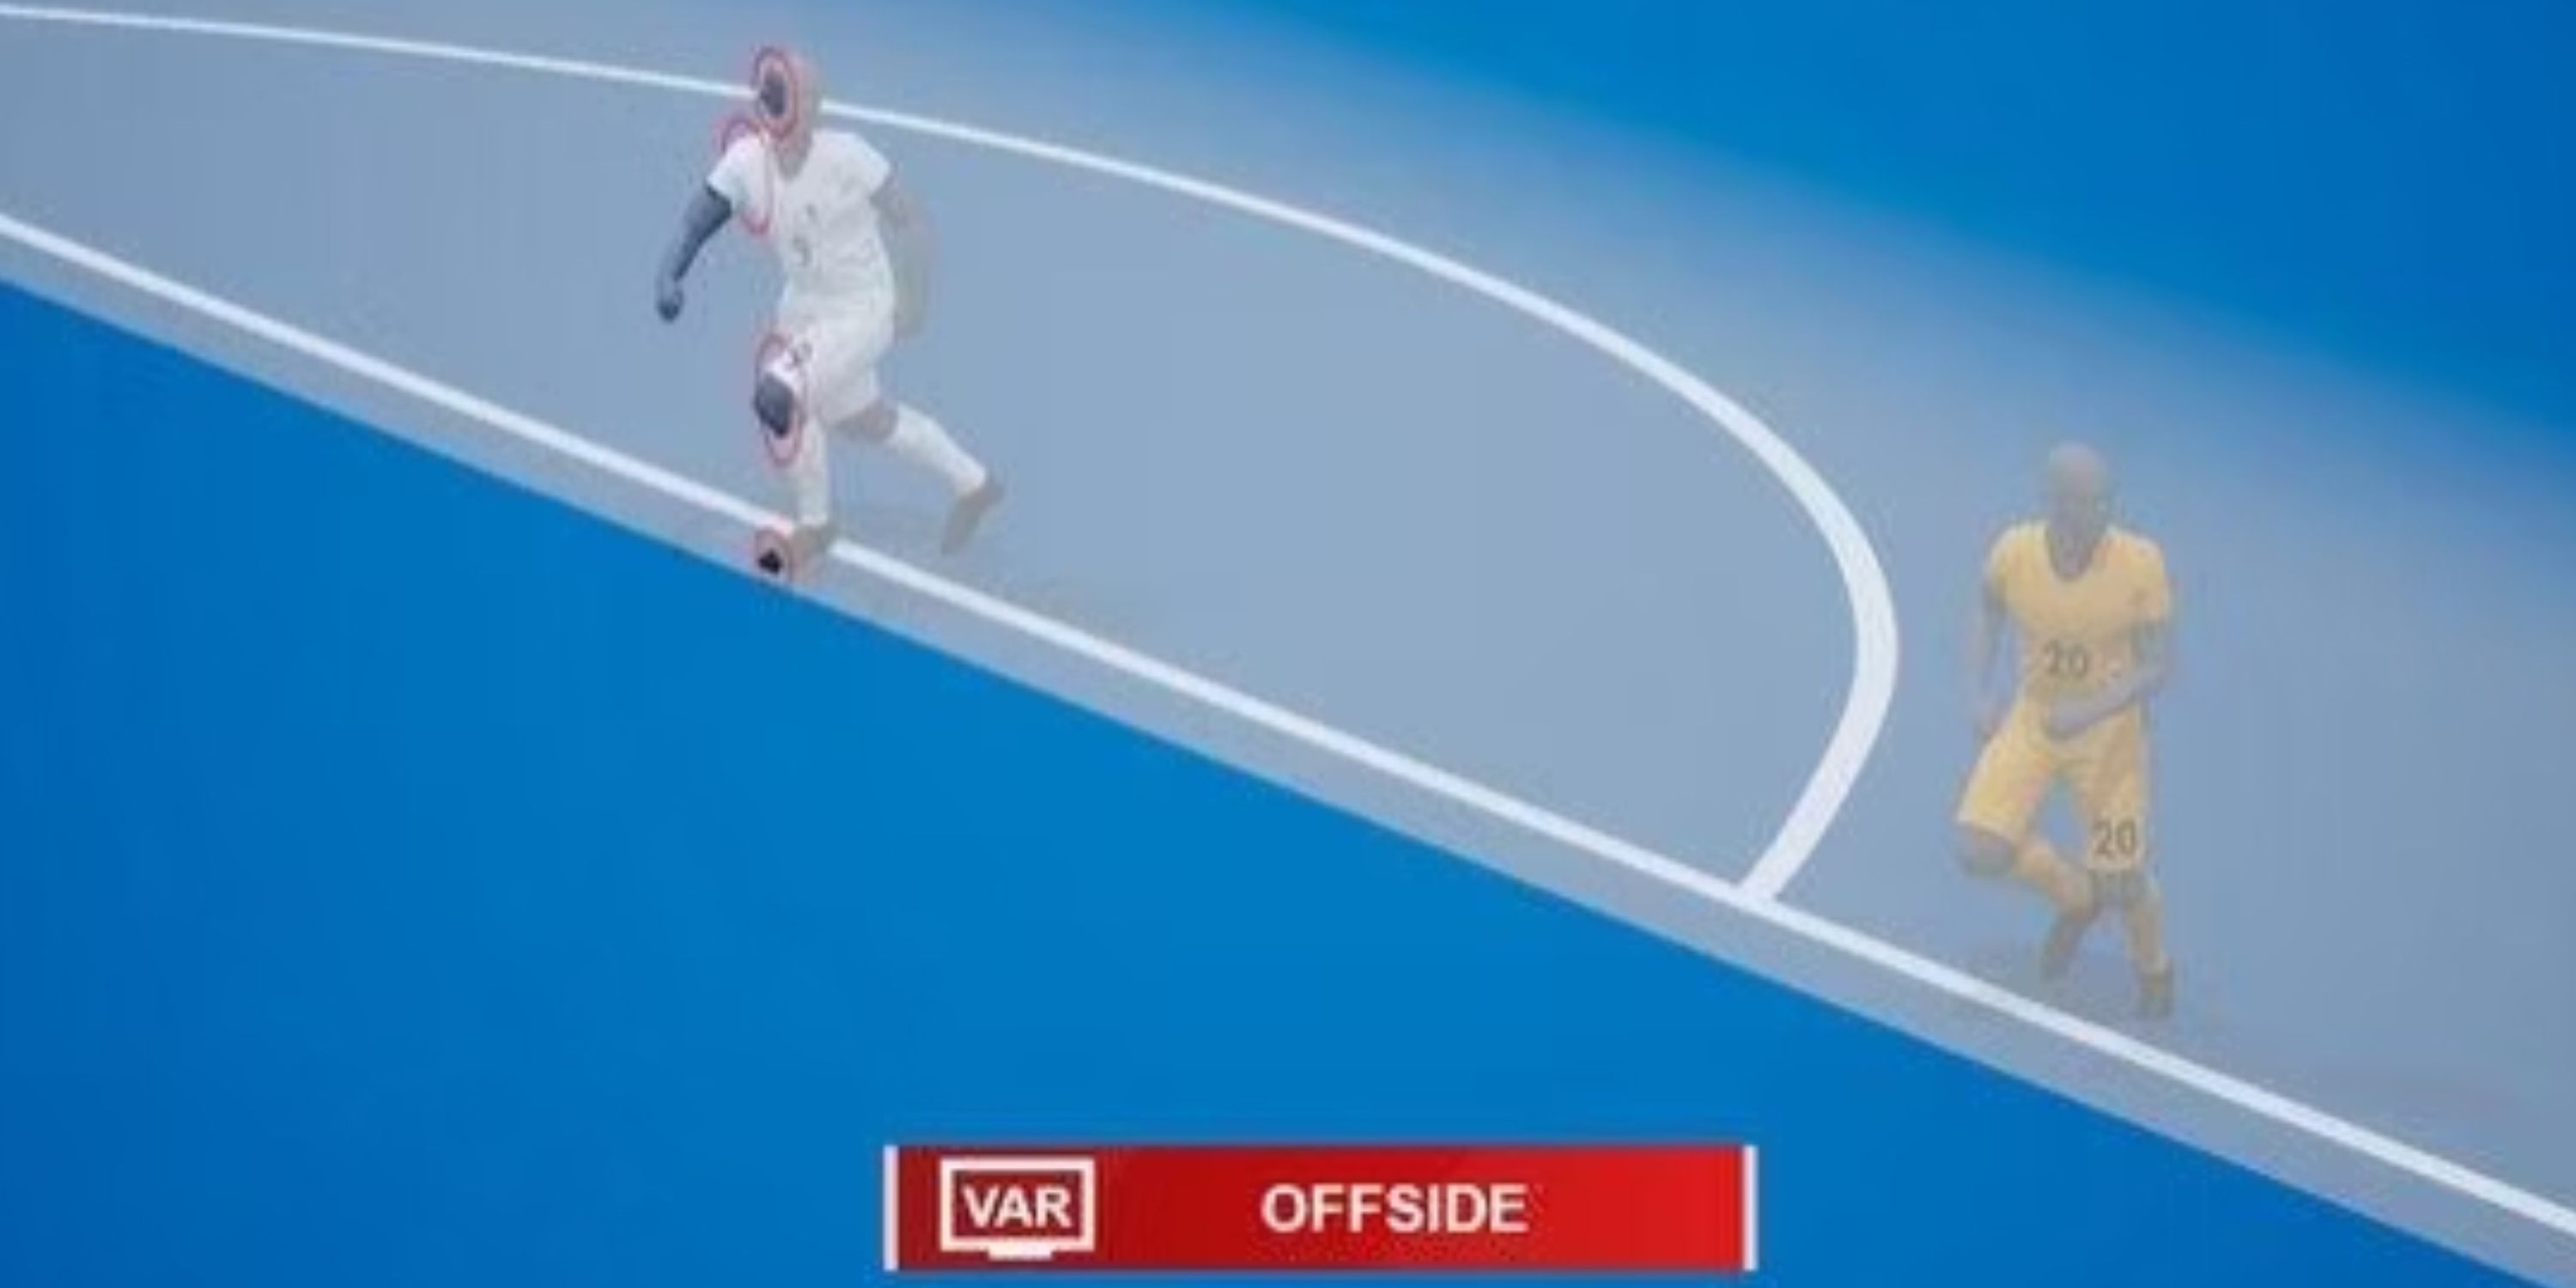 Semi-automated offside feature in soccer.